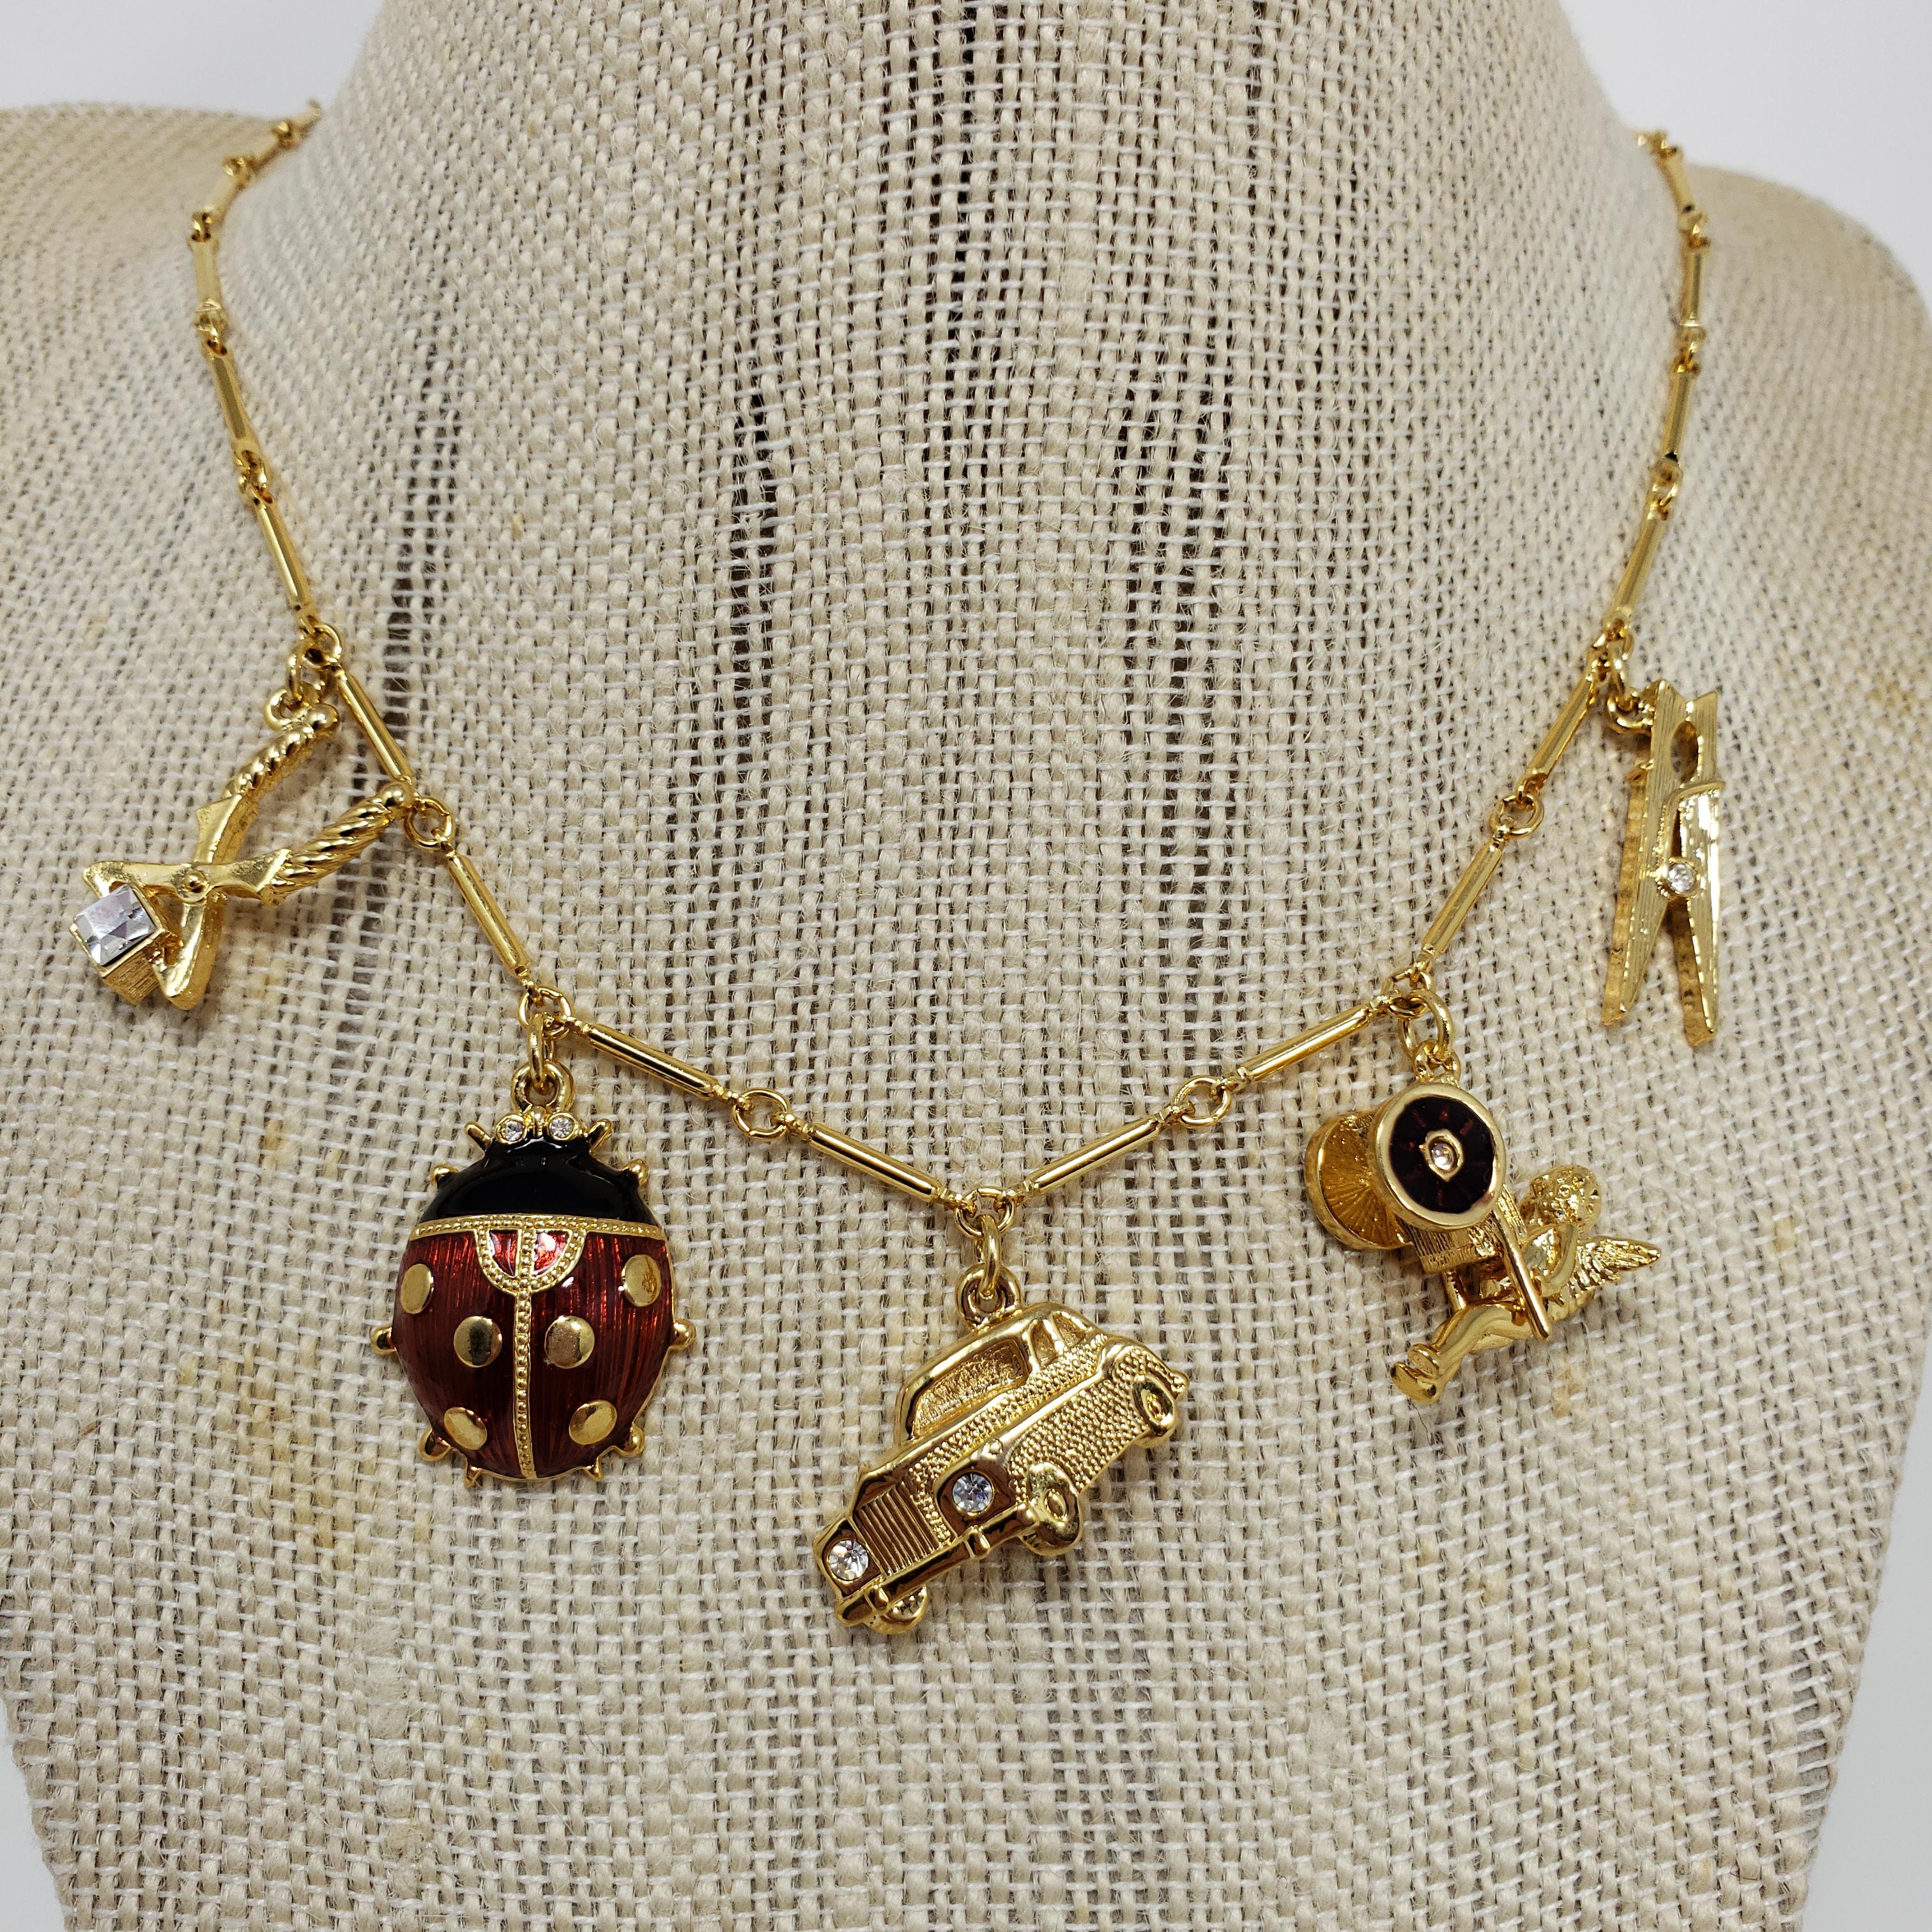 Kenneth Jay Lane Bar Link Charm Necklace in Gold, features Ladybug, Car, Angel In New Condition For Sale In Milford, DE